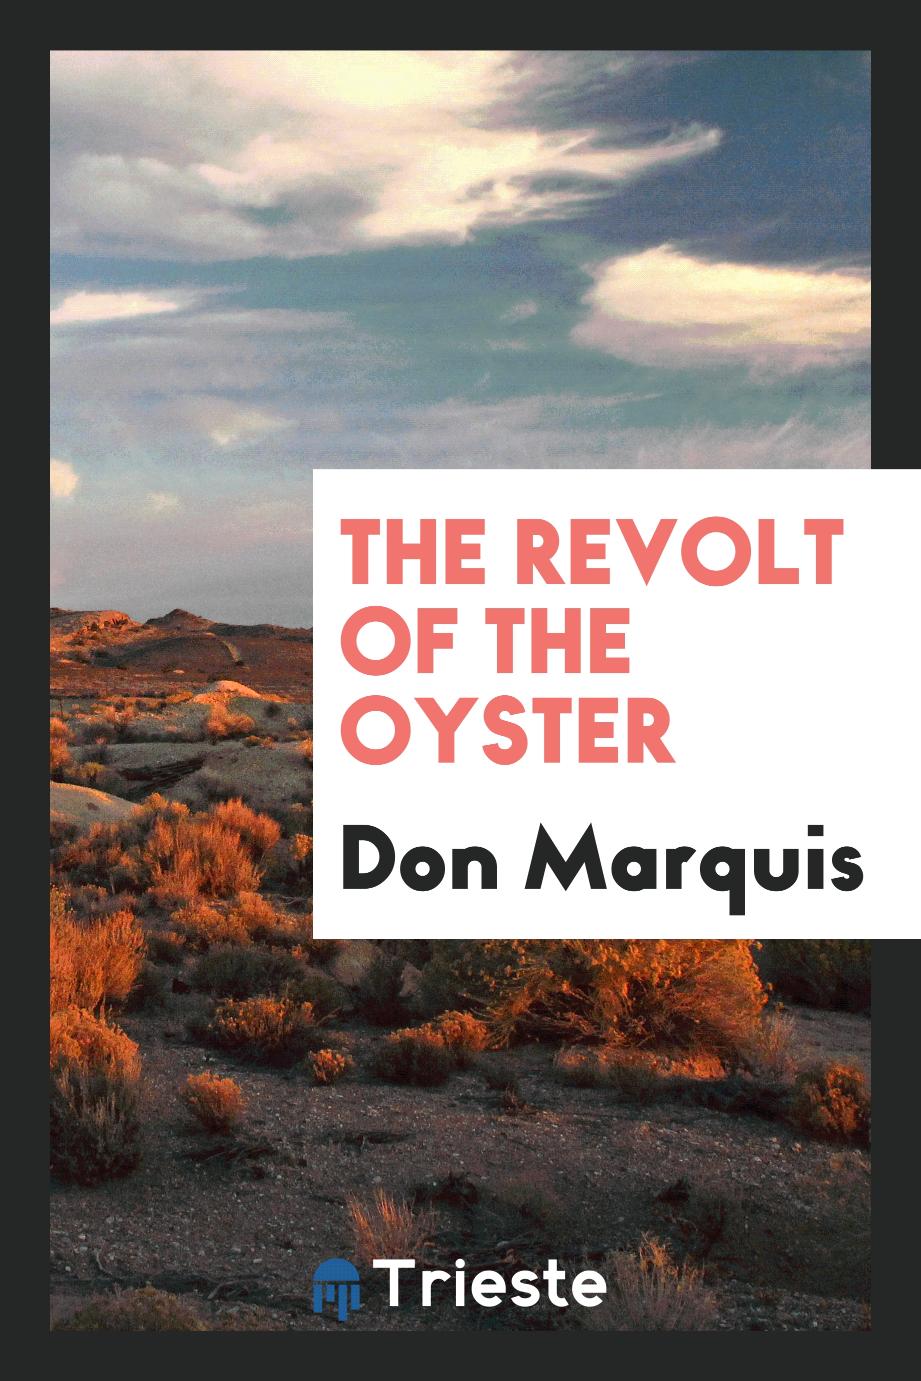 The revolt of the oyster